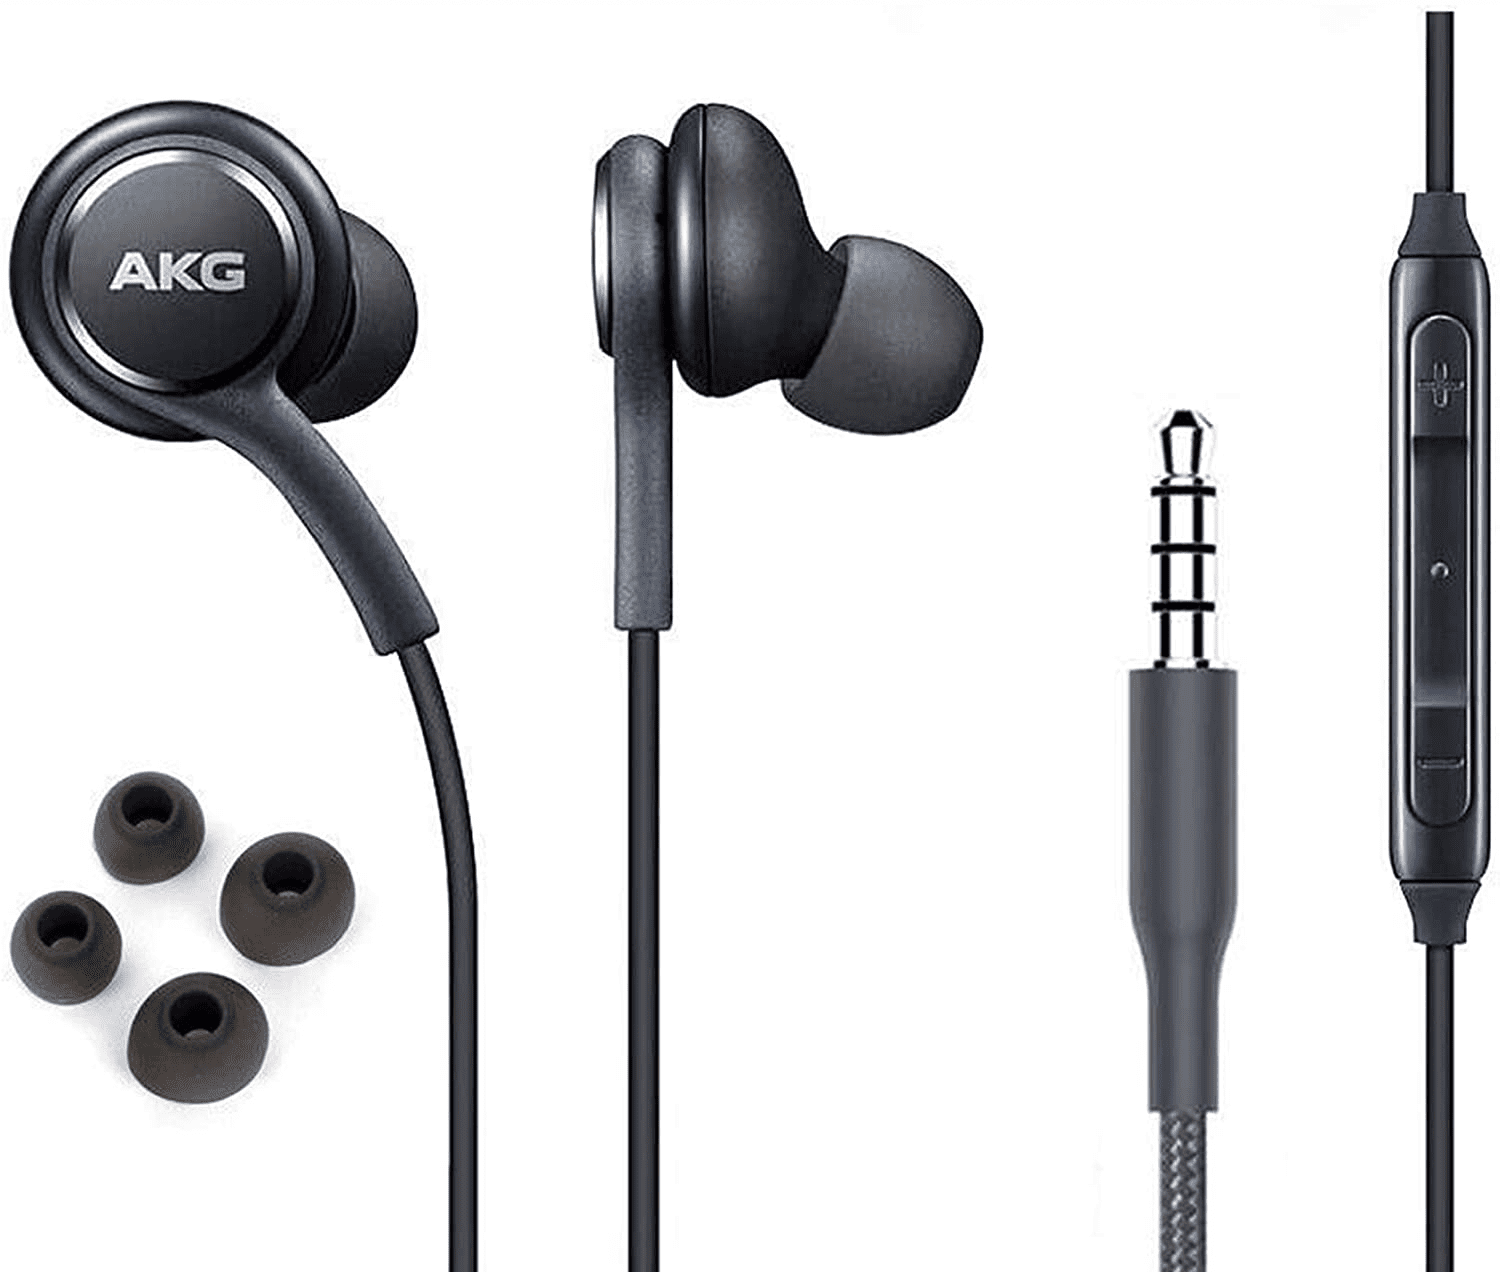 diepvries Manie duidelijkheid OEM InEar Earbuds Stereo Headphones for Sony Xperia Z1 Compact Plus Cable -  Designed by AKG - with Microphone and Volume Buttons (Black) - Walmart.com